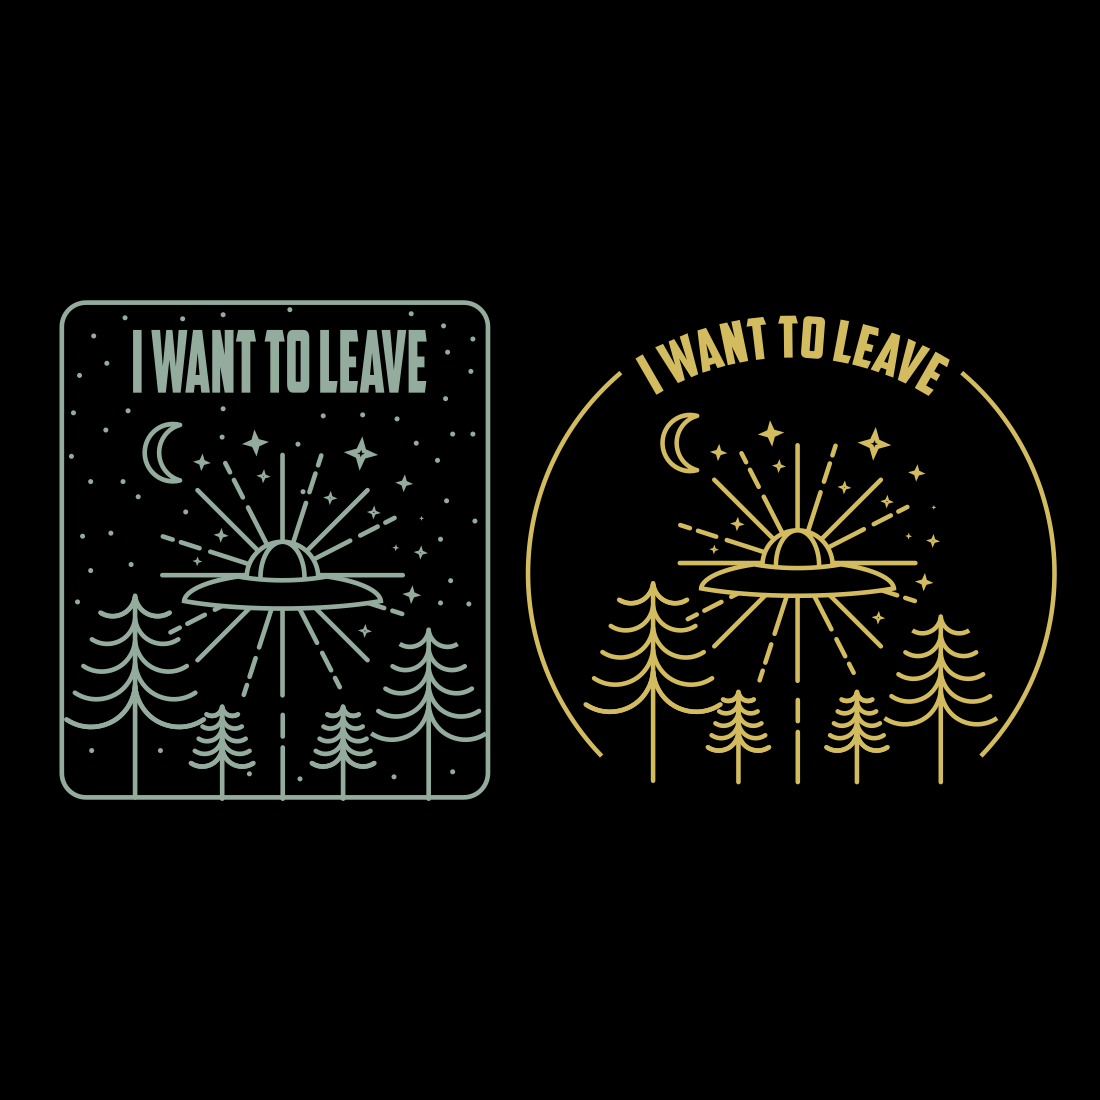 I Want to Leave Simple Line Art T- shirt Design cover image.